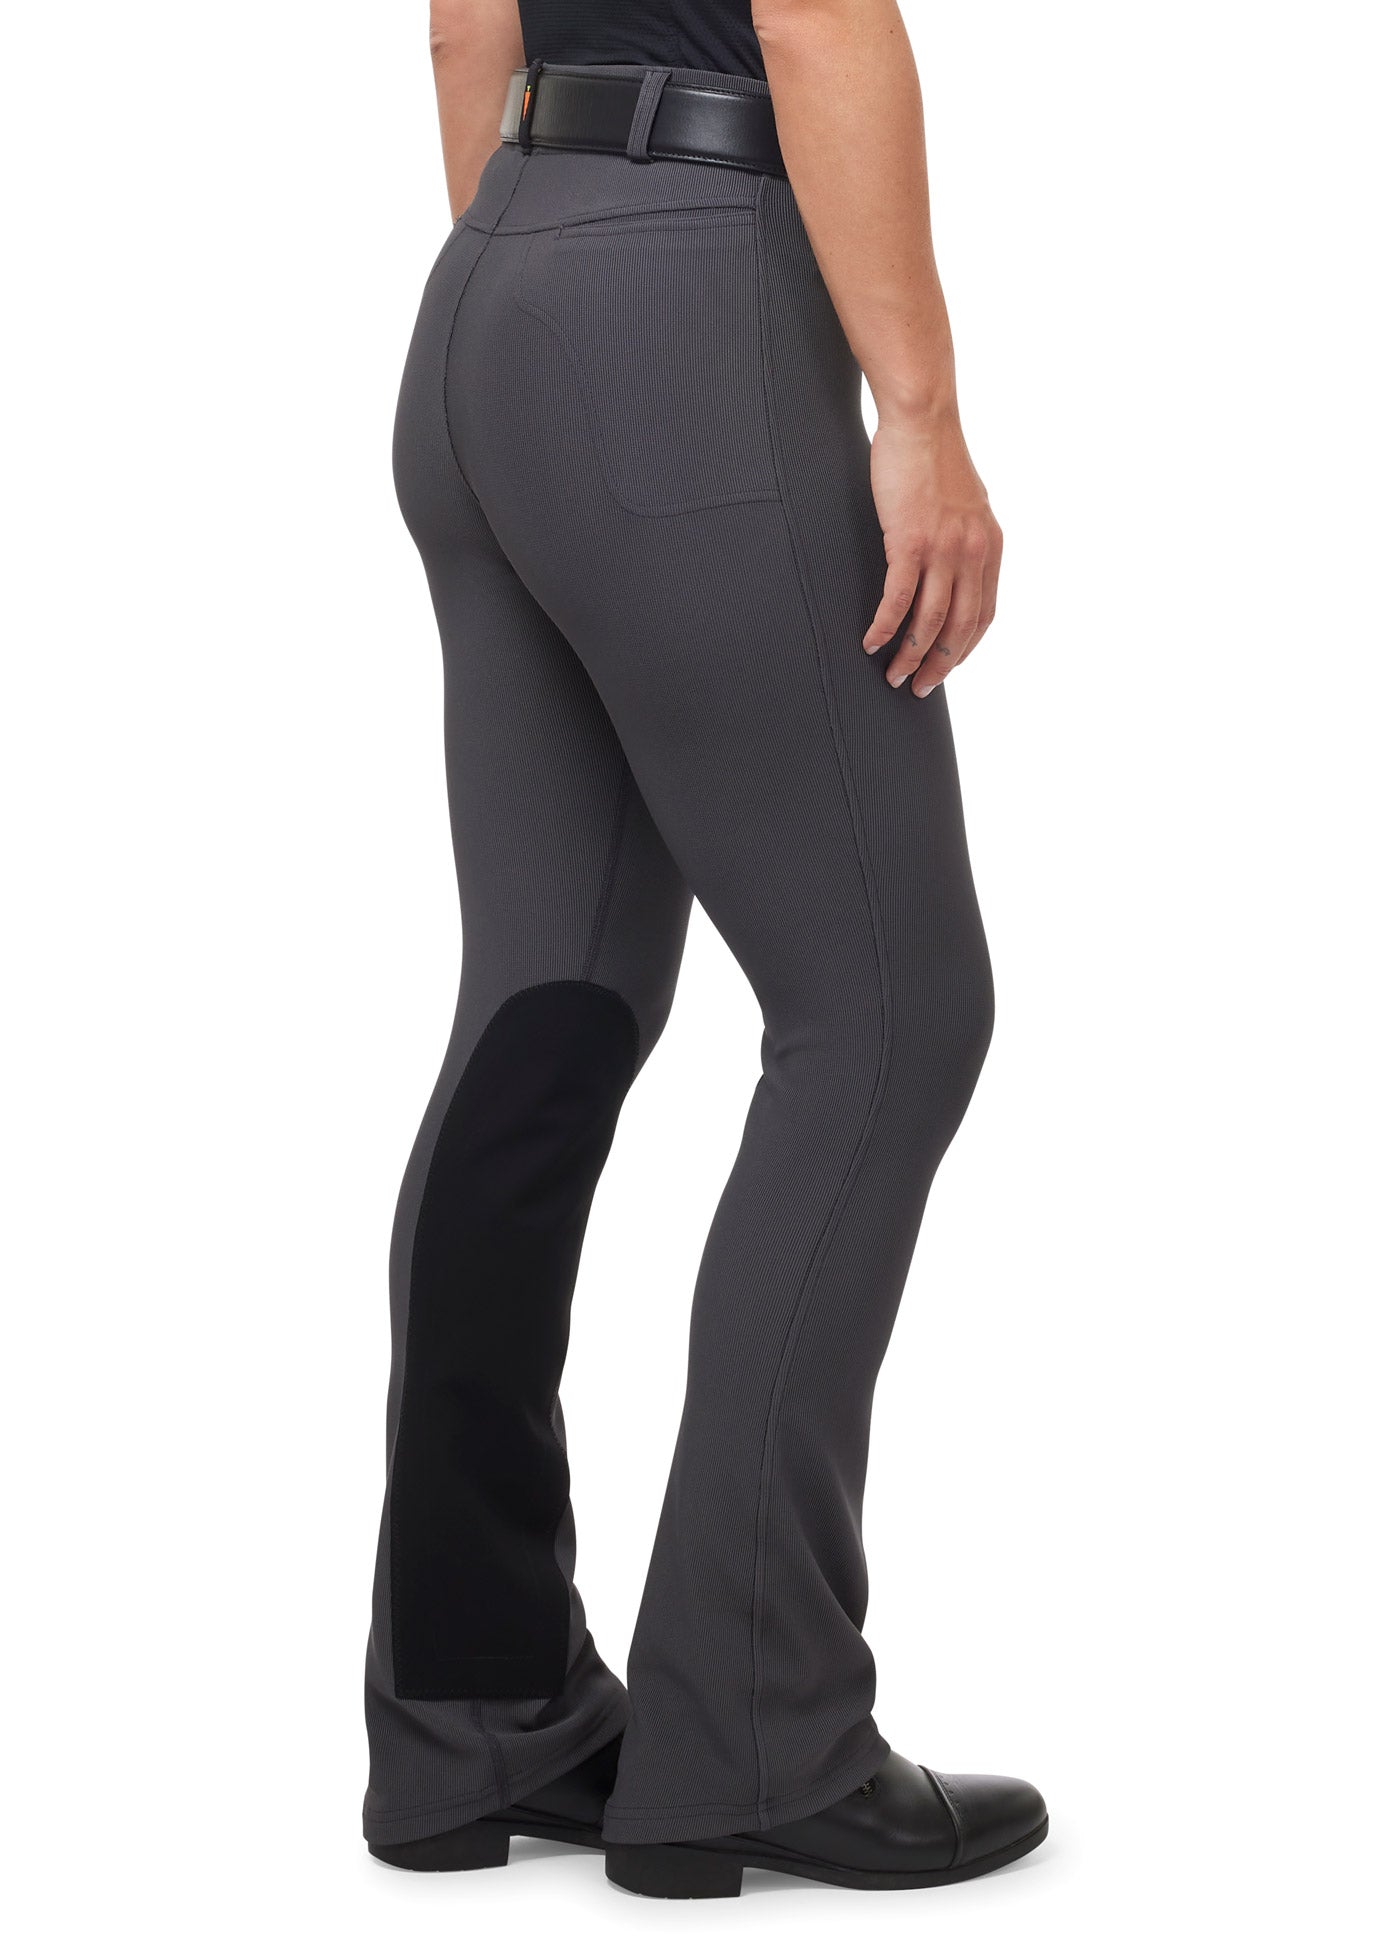 Motorcycle Riding Pant On Rent For Men and Women In Bangalore